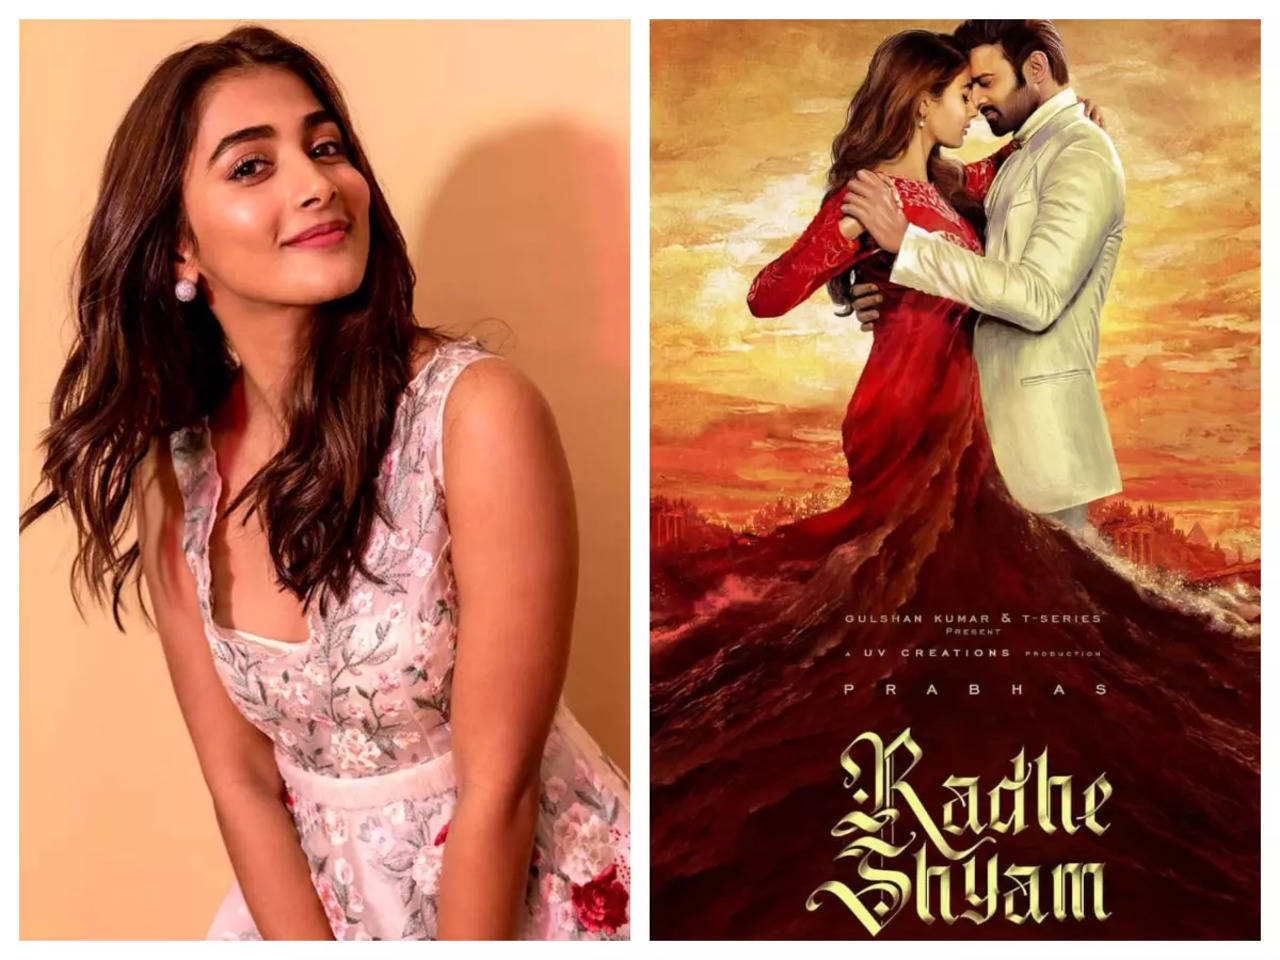 Pooja Hegde talks to fans about 'Radhe Shyam' with Prabhas, says 'it is an  epic love story with grand fairytale visuals' | Hindi Movie News - Times of  India